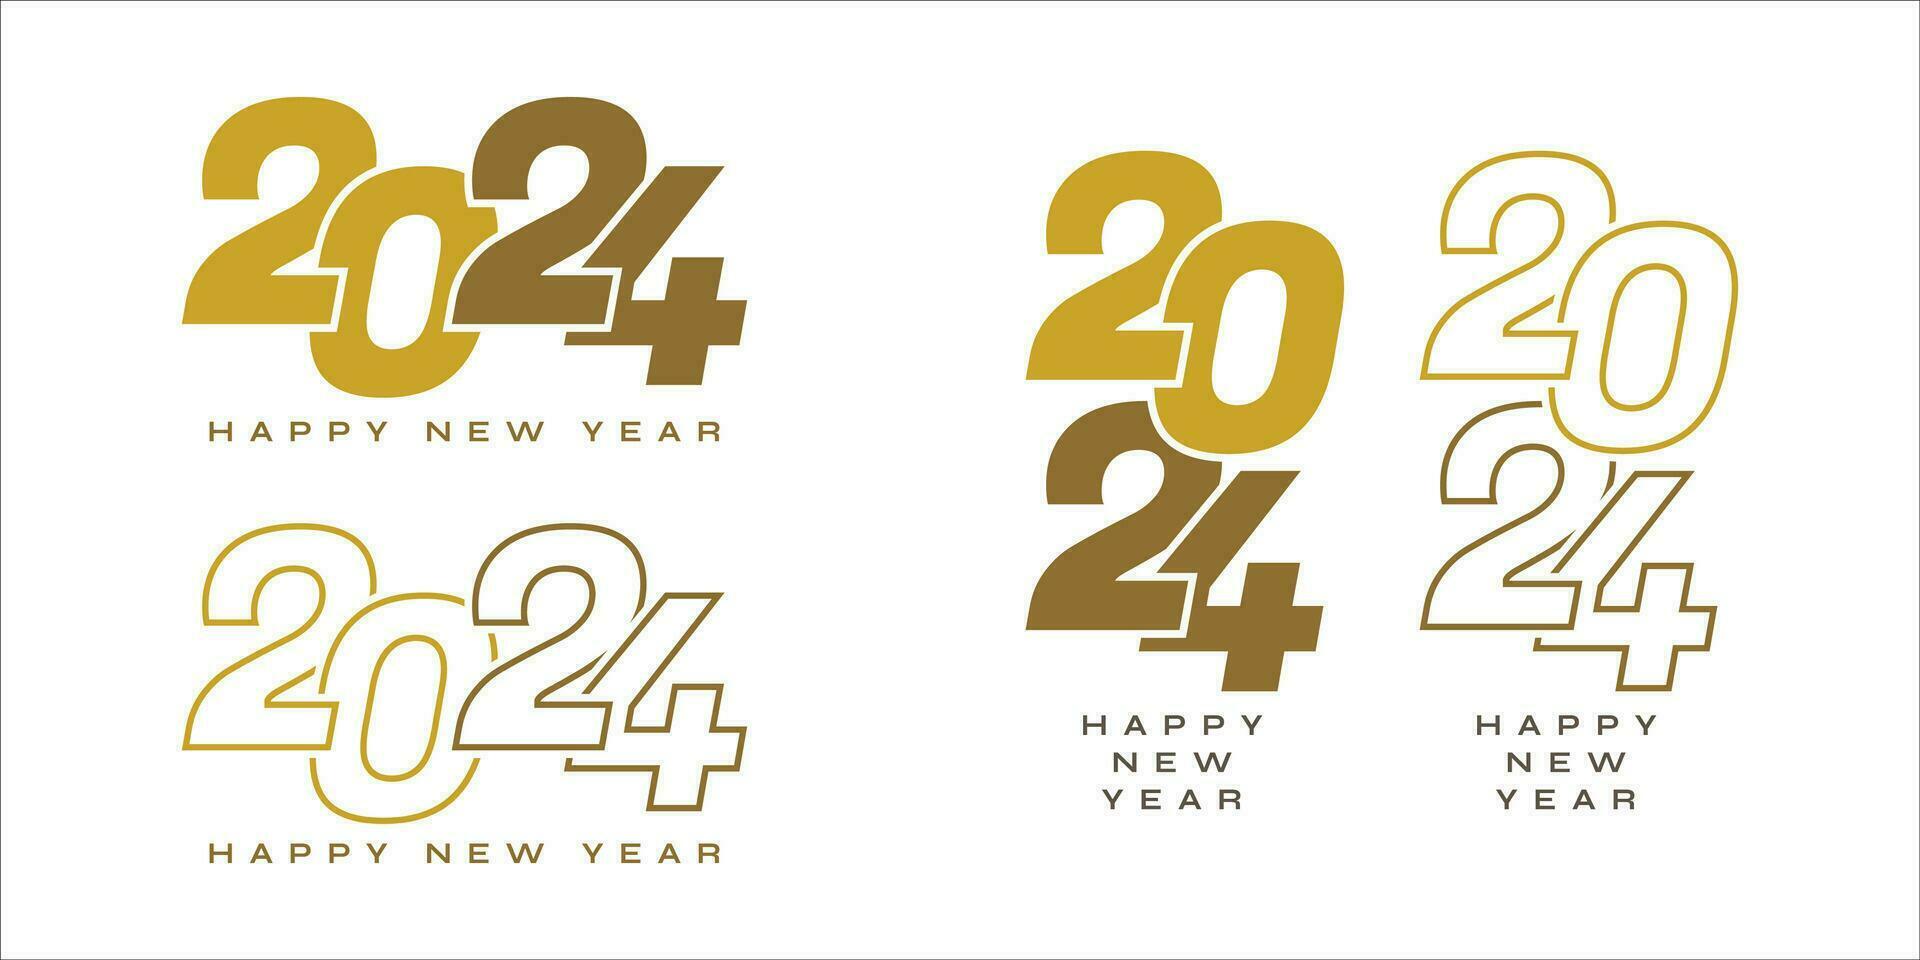 2024 number design. 2024 Happy New Year logo text design. Vector illustration logo for template, diaries, notebooks, calendars.